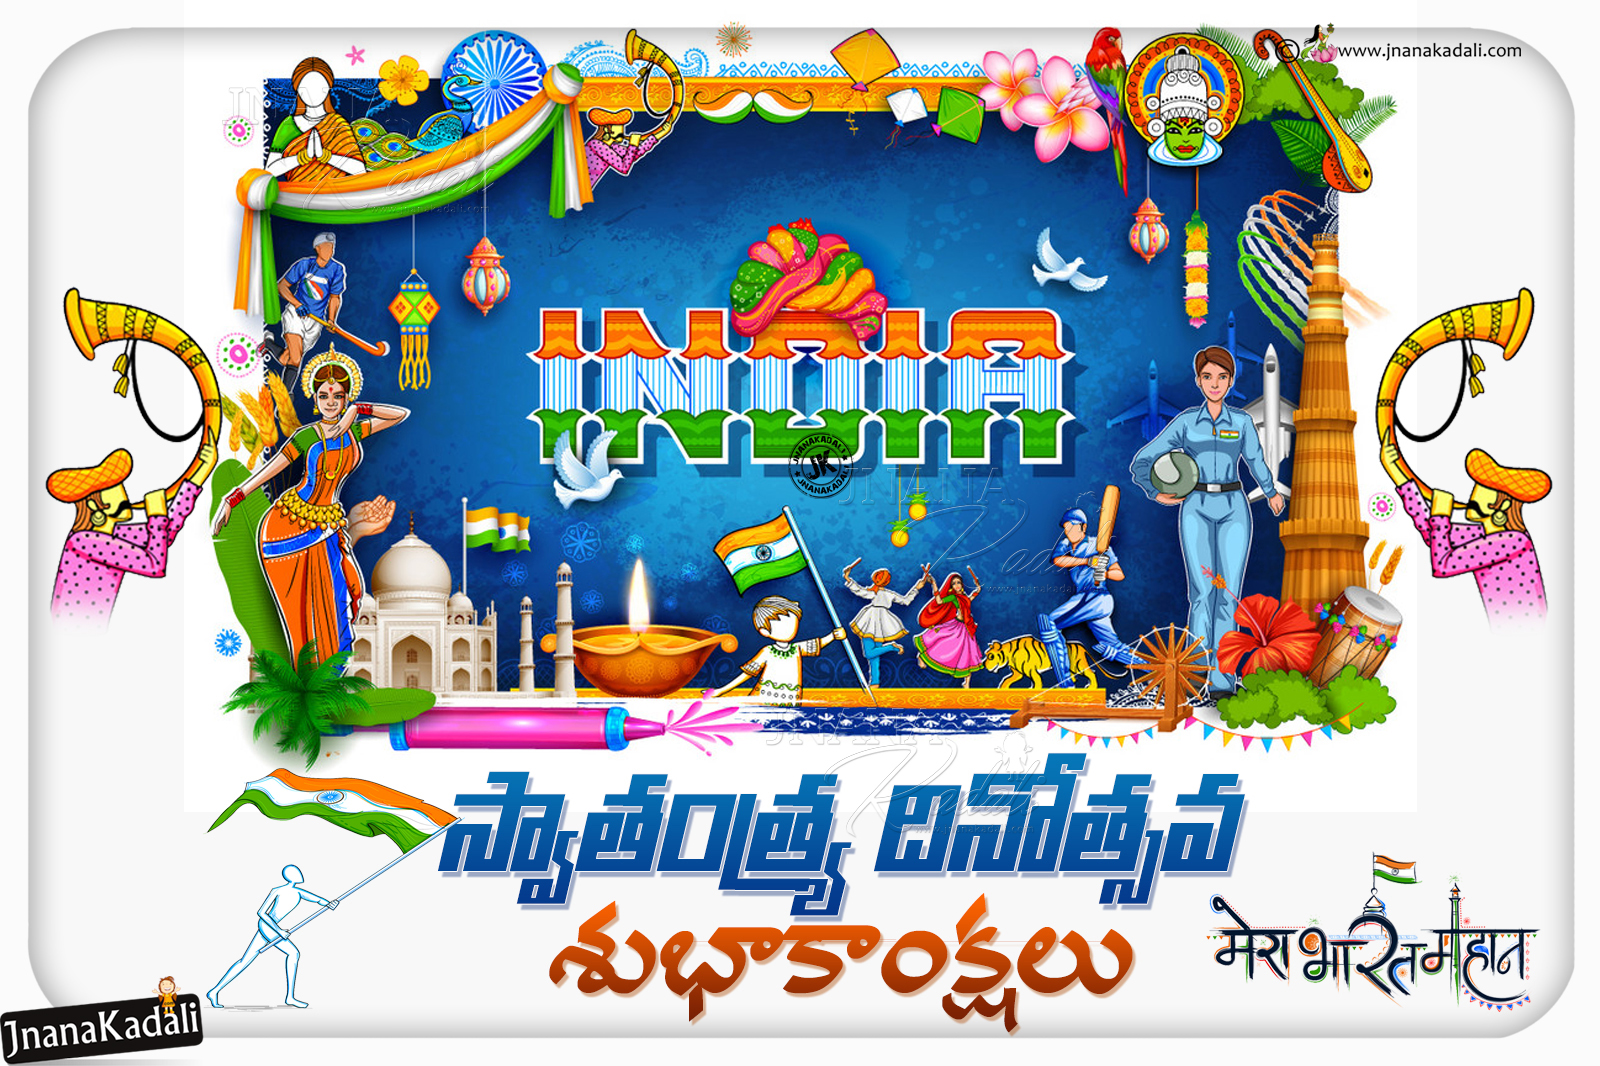 Advanced Happy Independence Day Greetings in Telugu with 4K Ultra ...